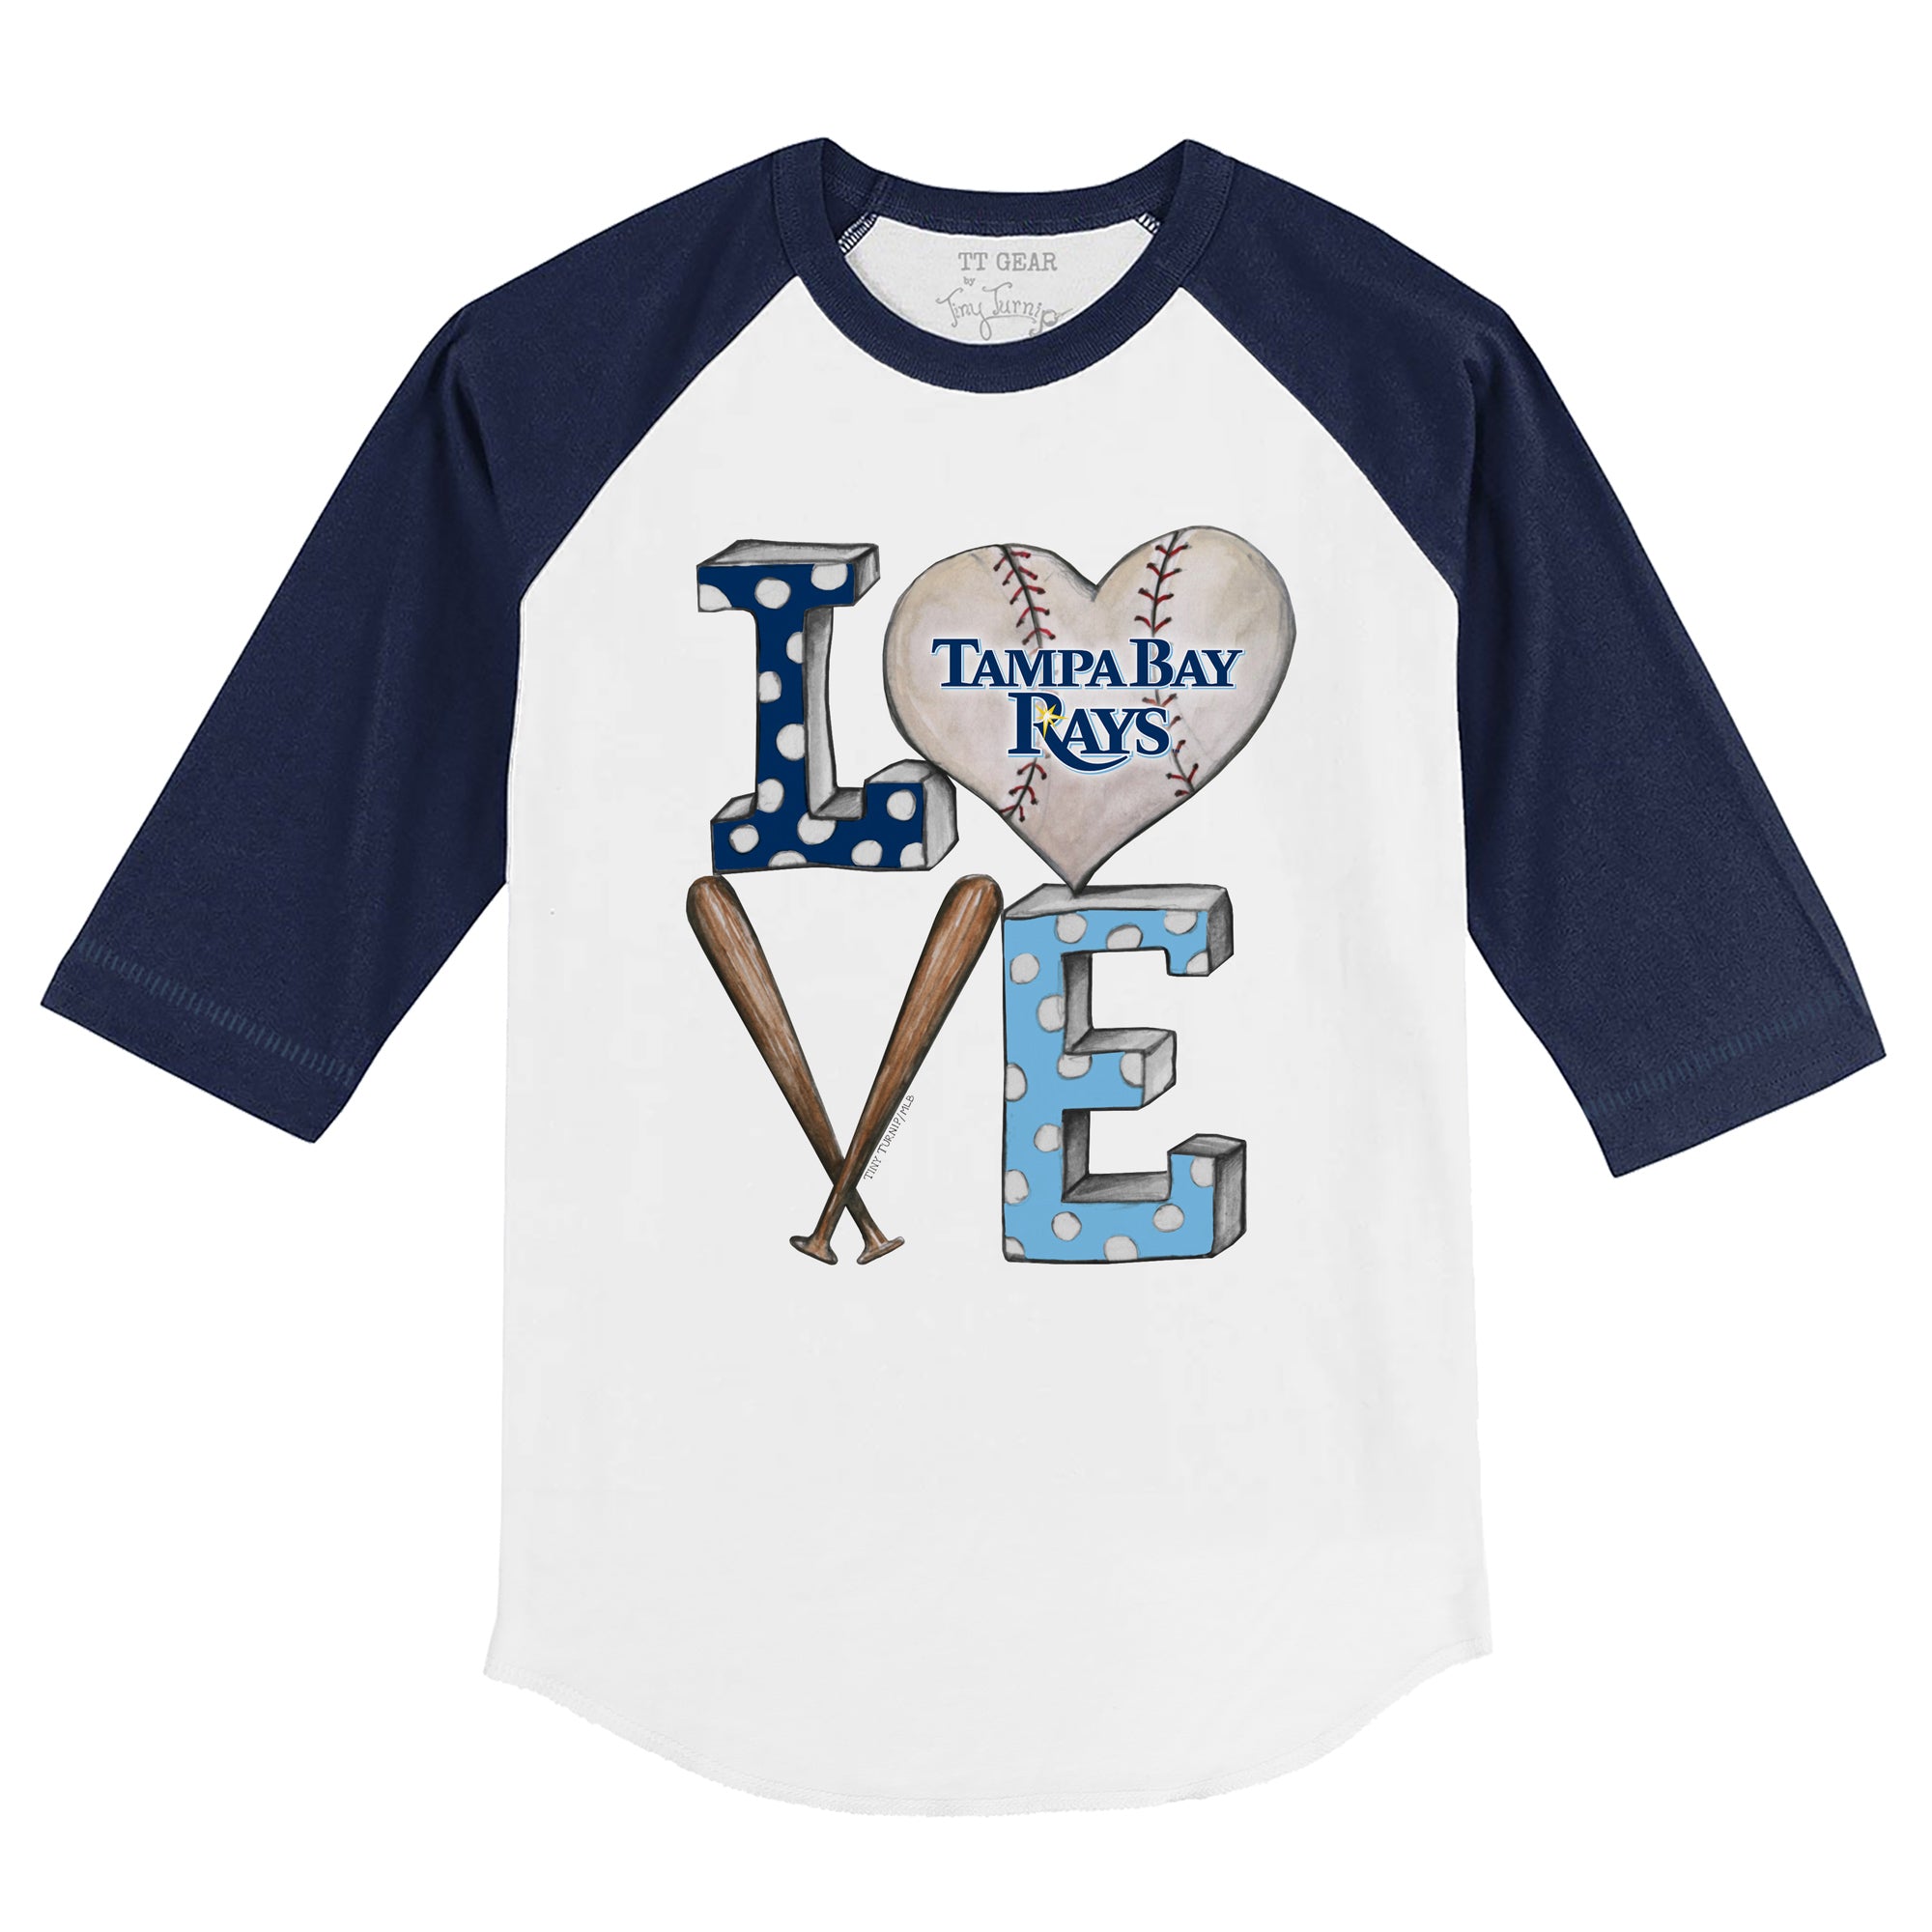 Customize Your Tampa Bay Rays Baseball Jersey - Navy